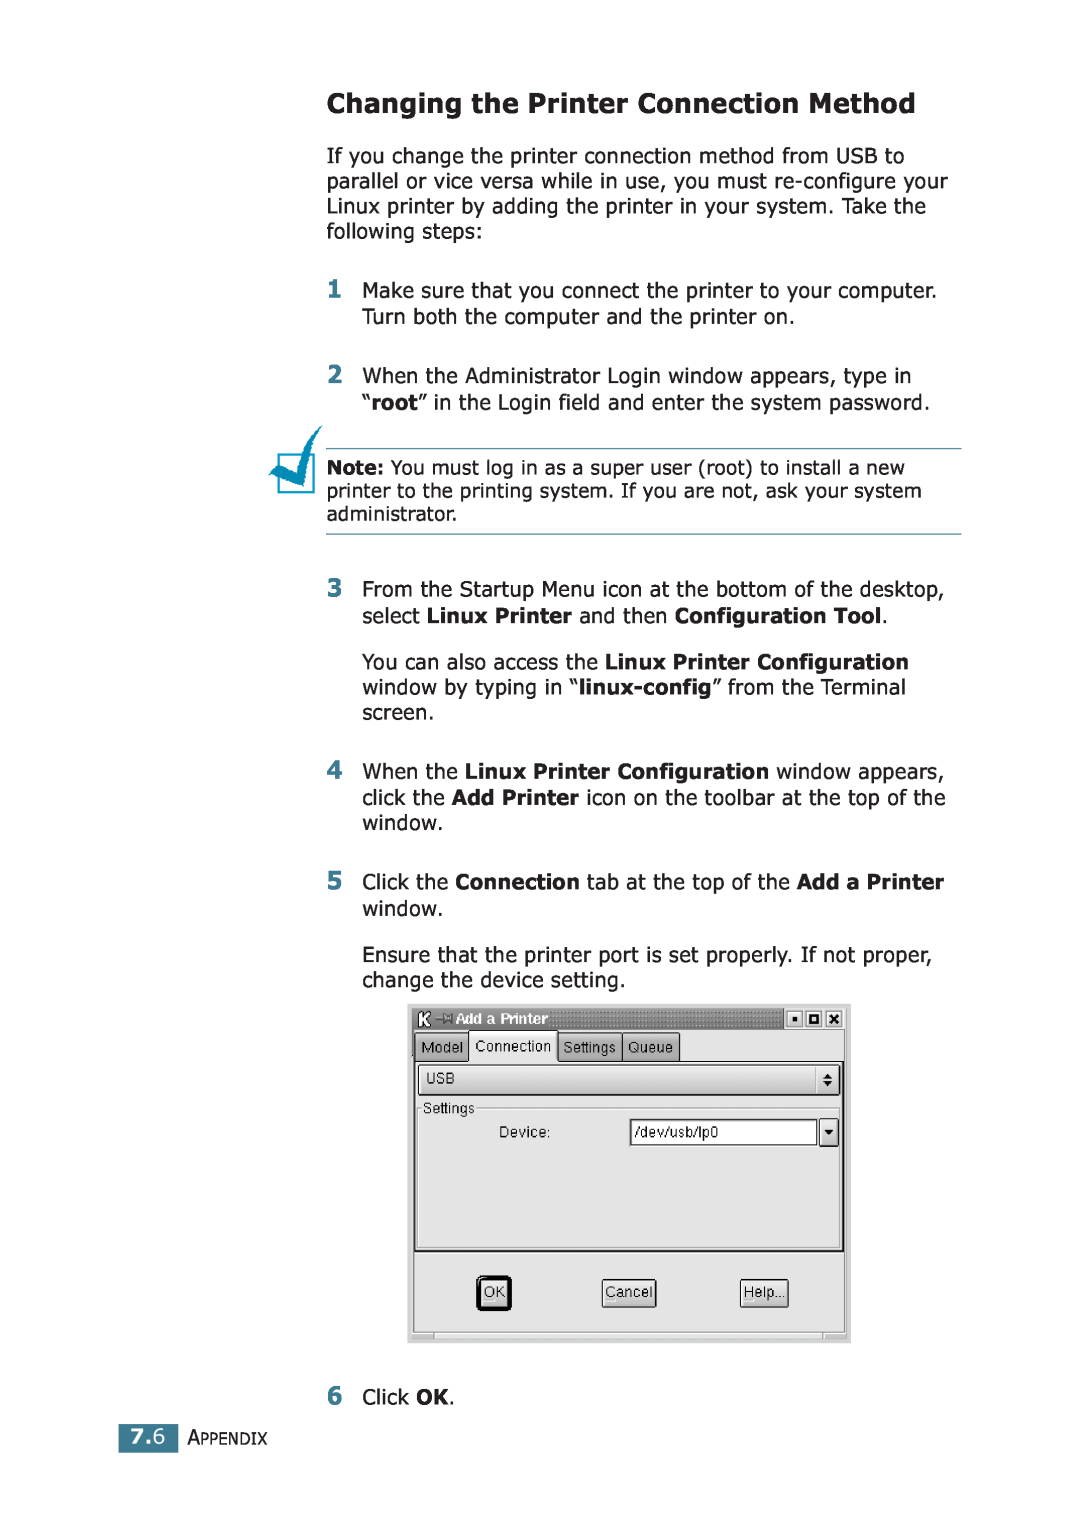 Samsung ML-1710P manual Changing the Printer Connection Method, Appendix 